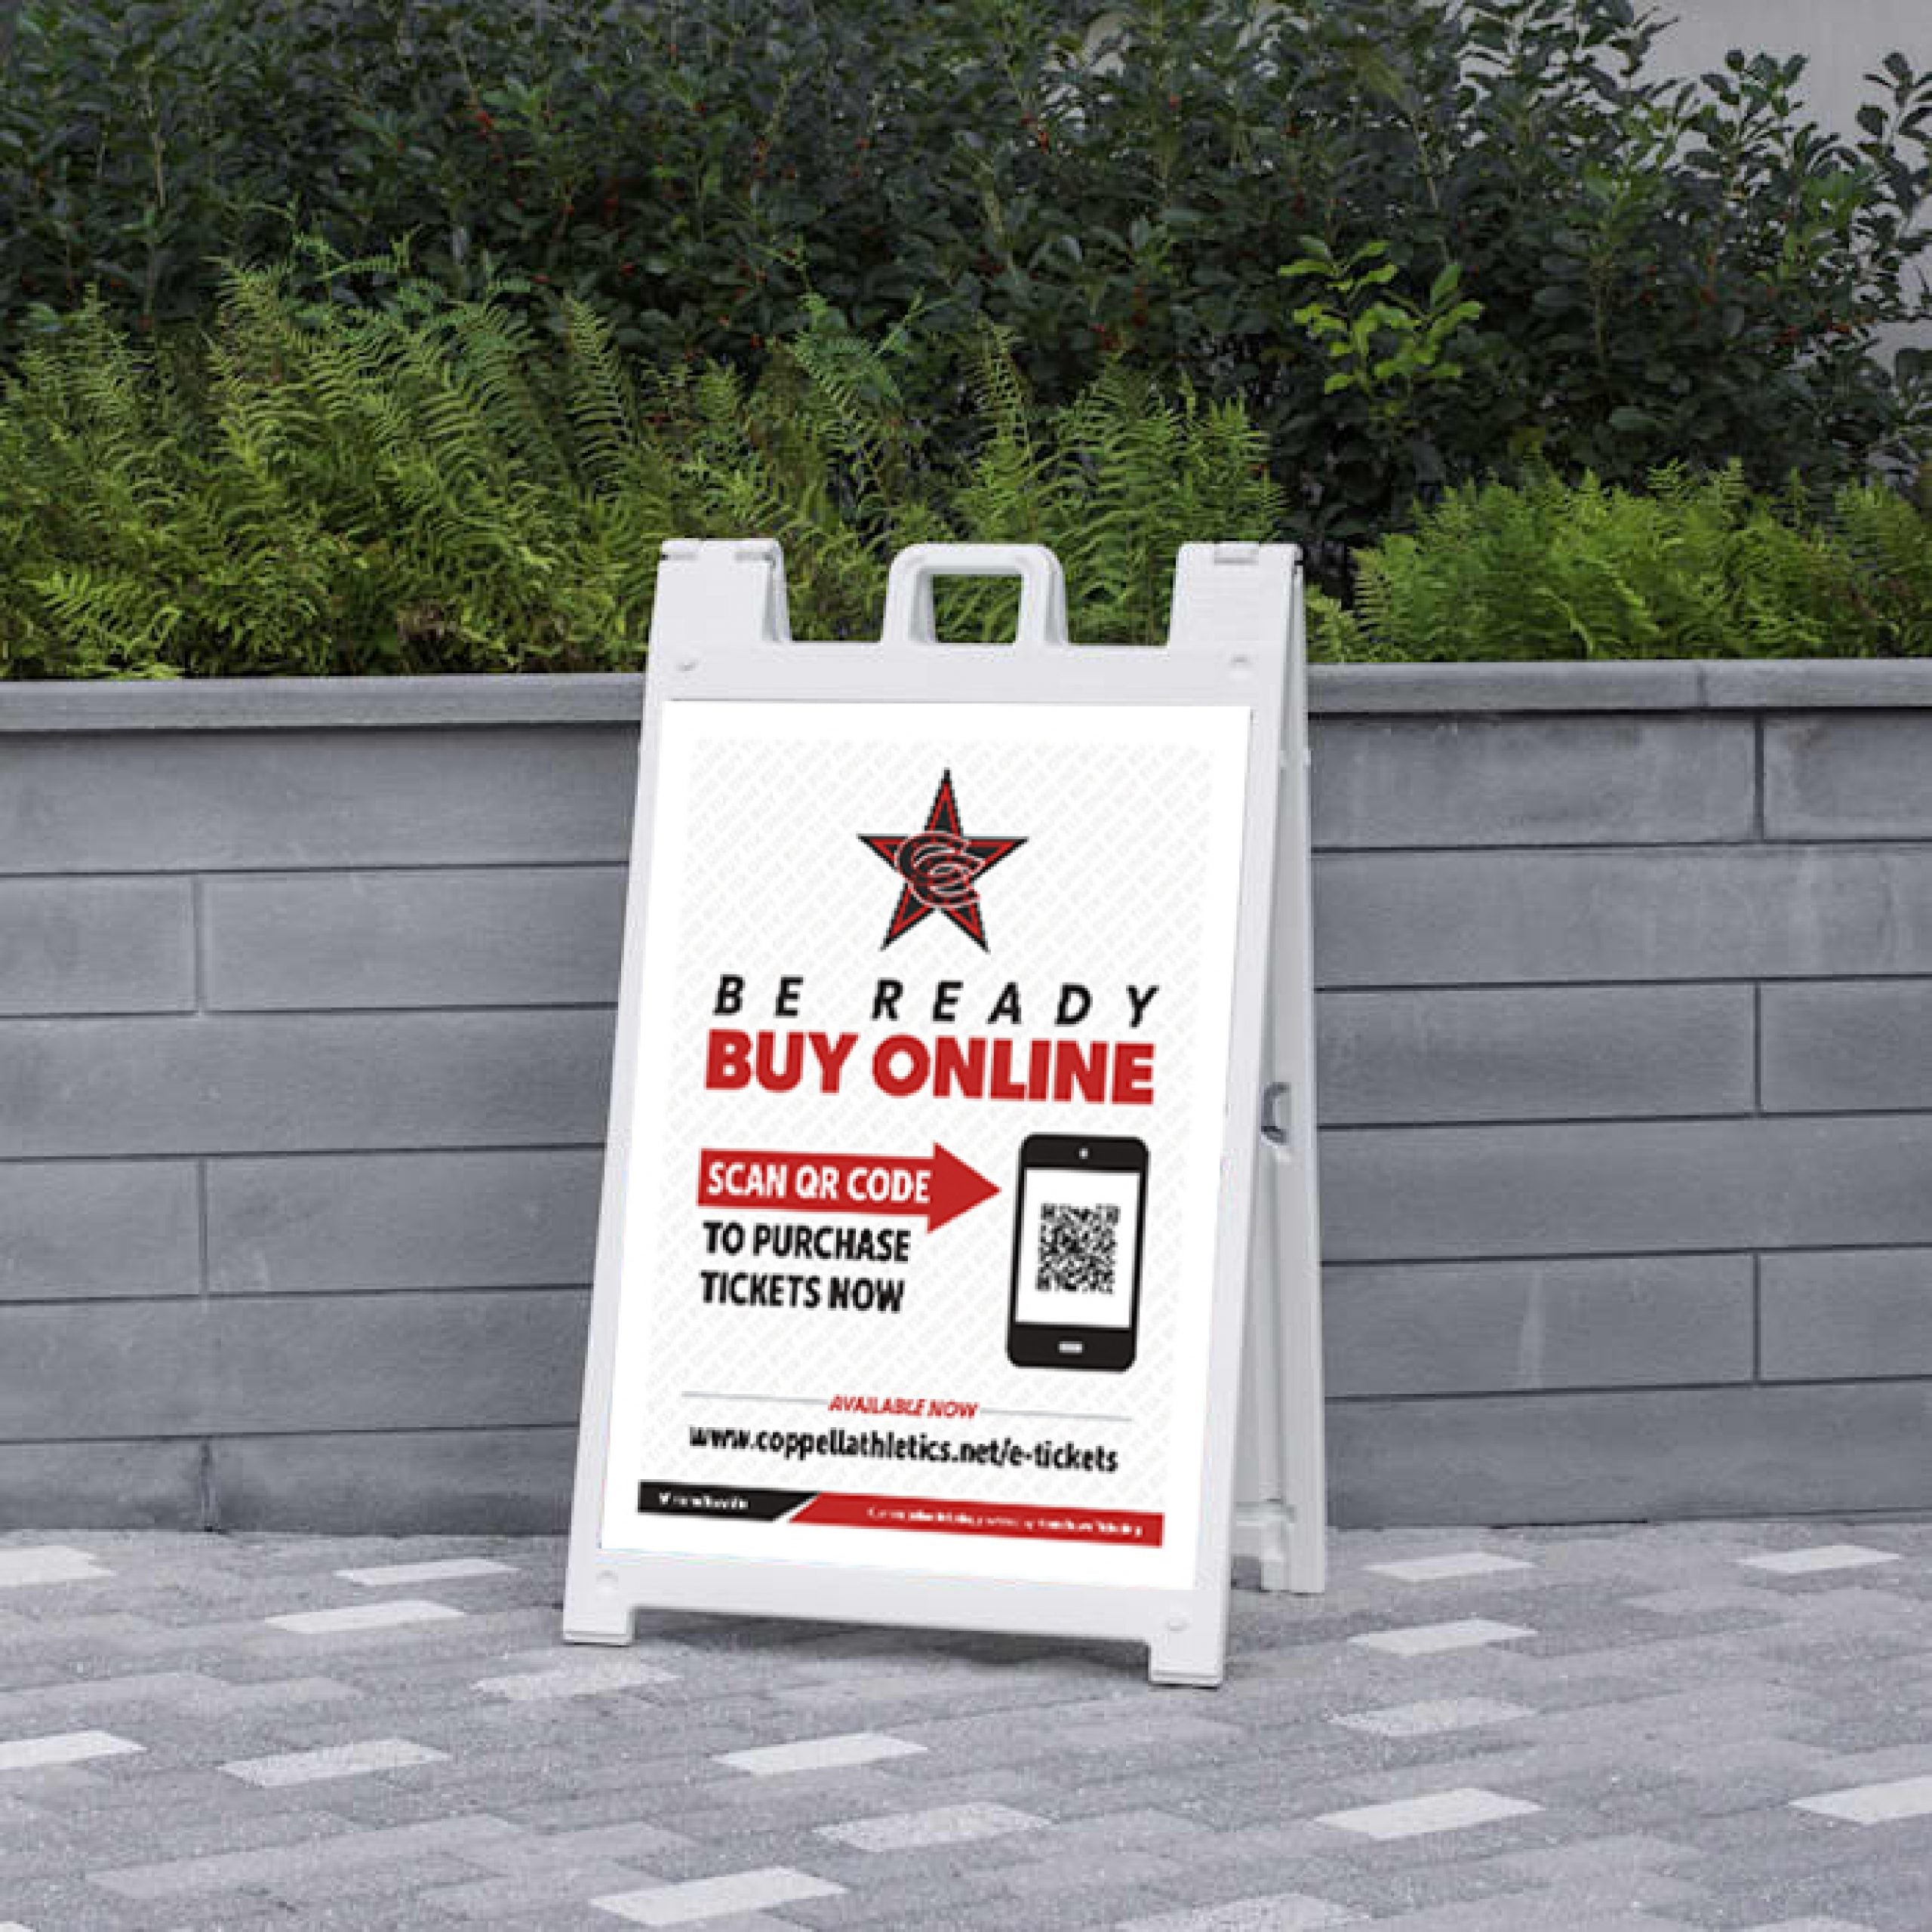 A-frame sign used for effective marketing campaigns